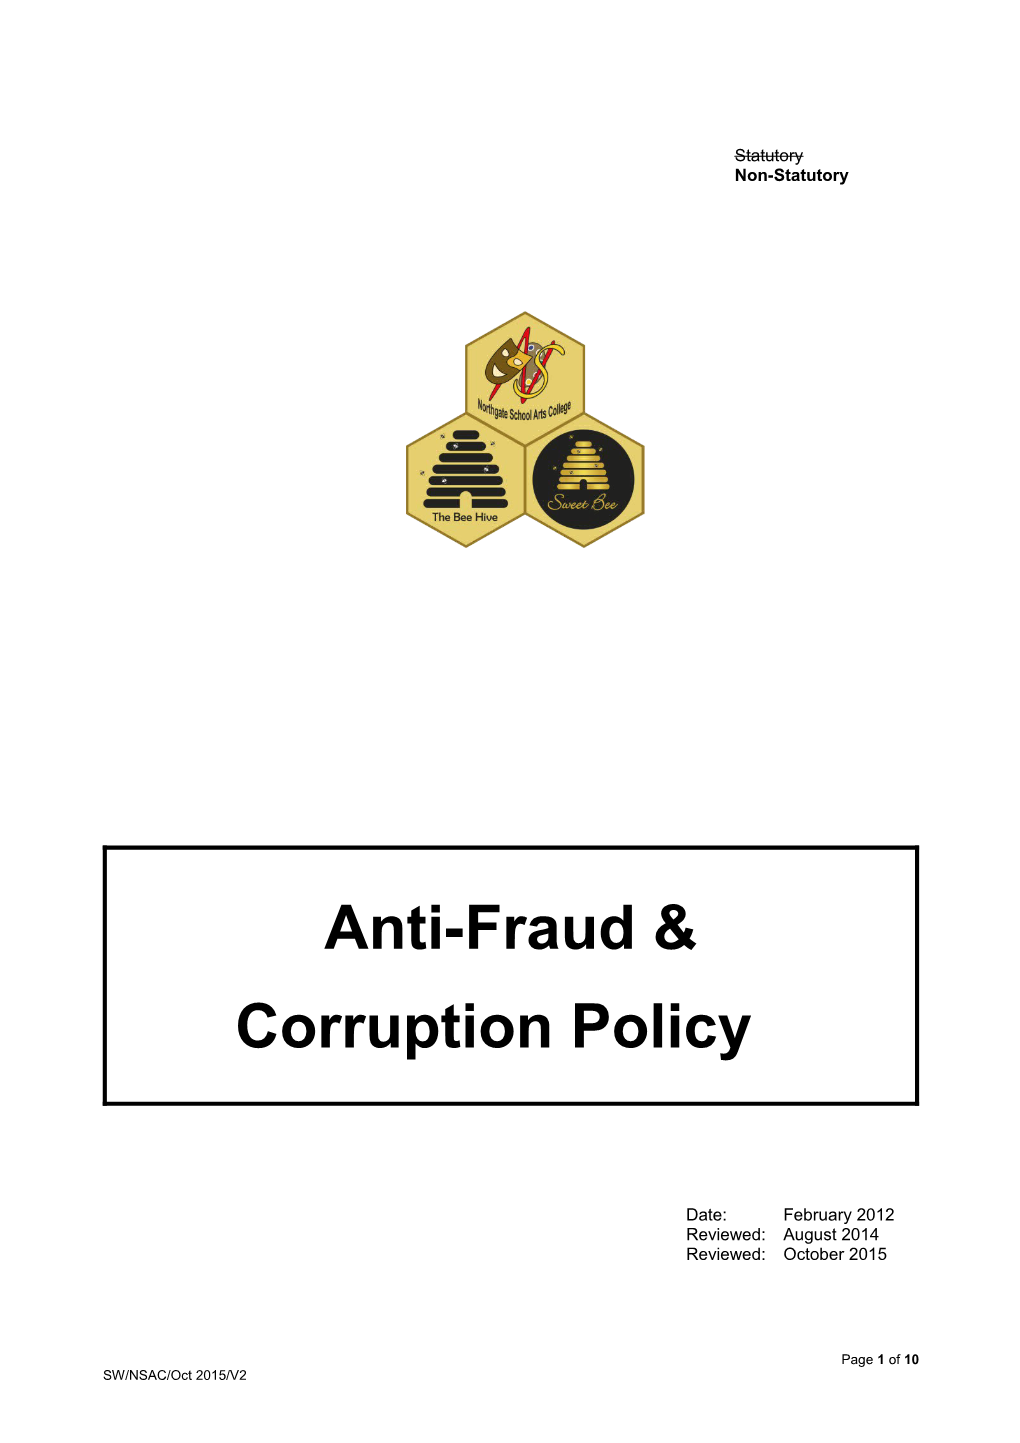 Appendix V - Fraud Policy and Procedures